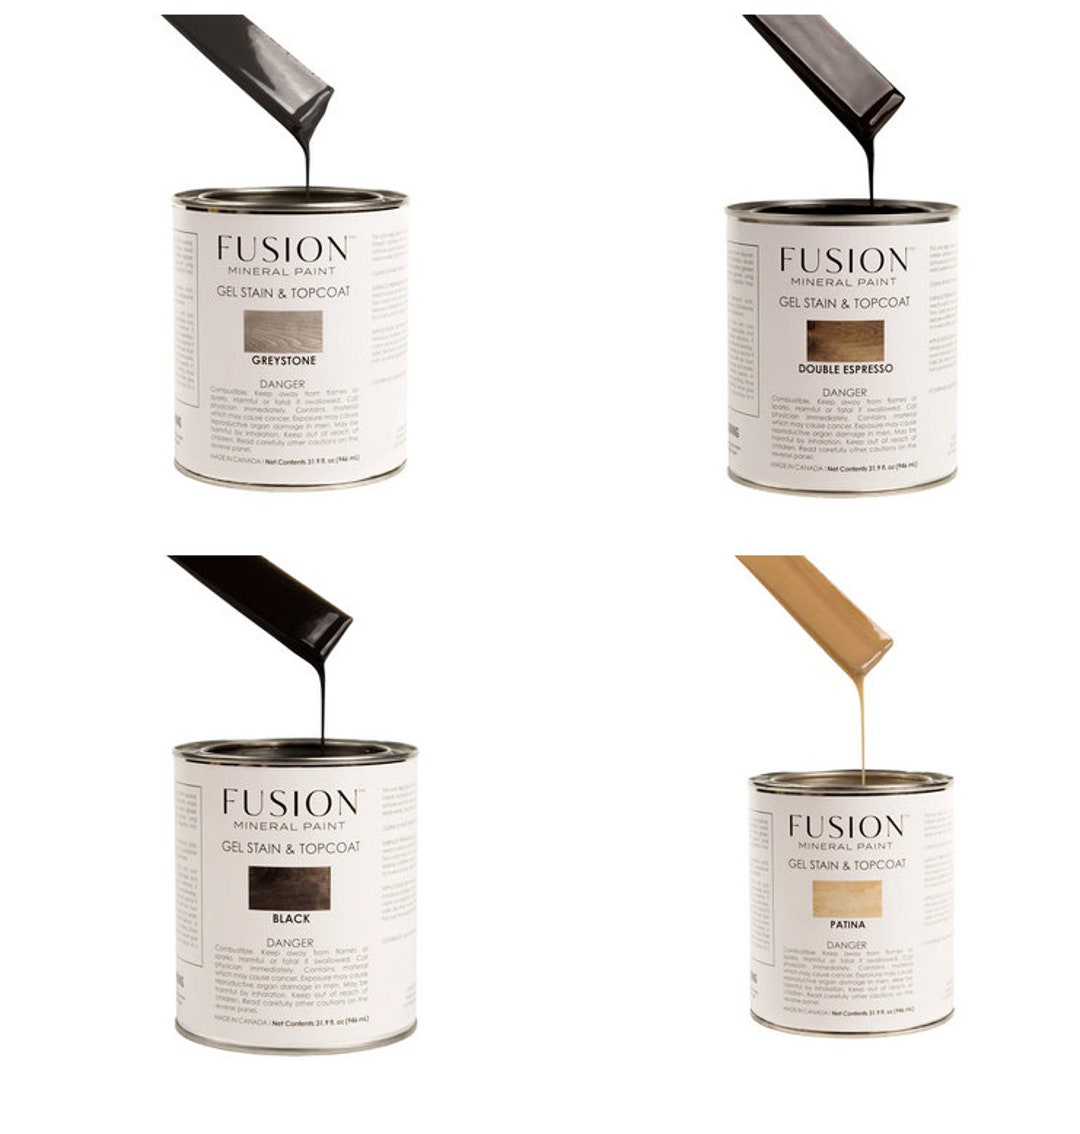 Pouring Resin – FUSION MINERAL PAINT